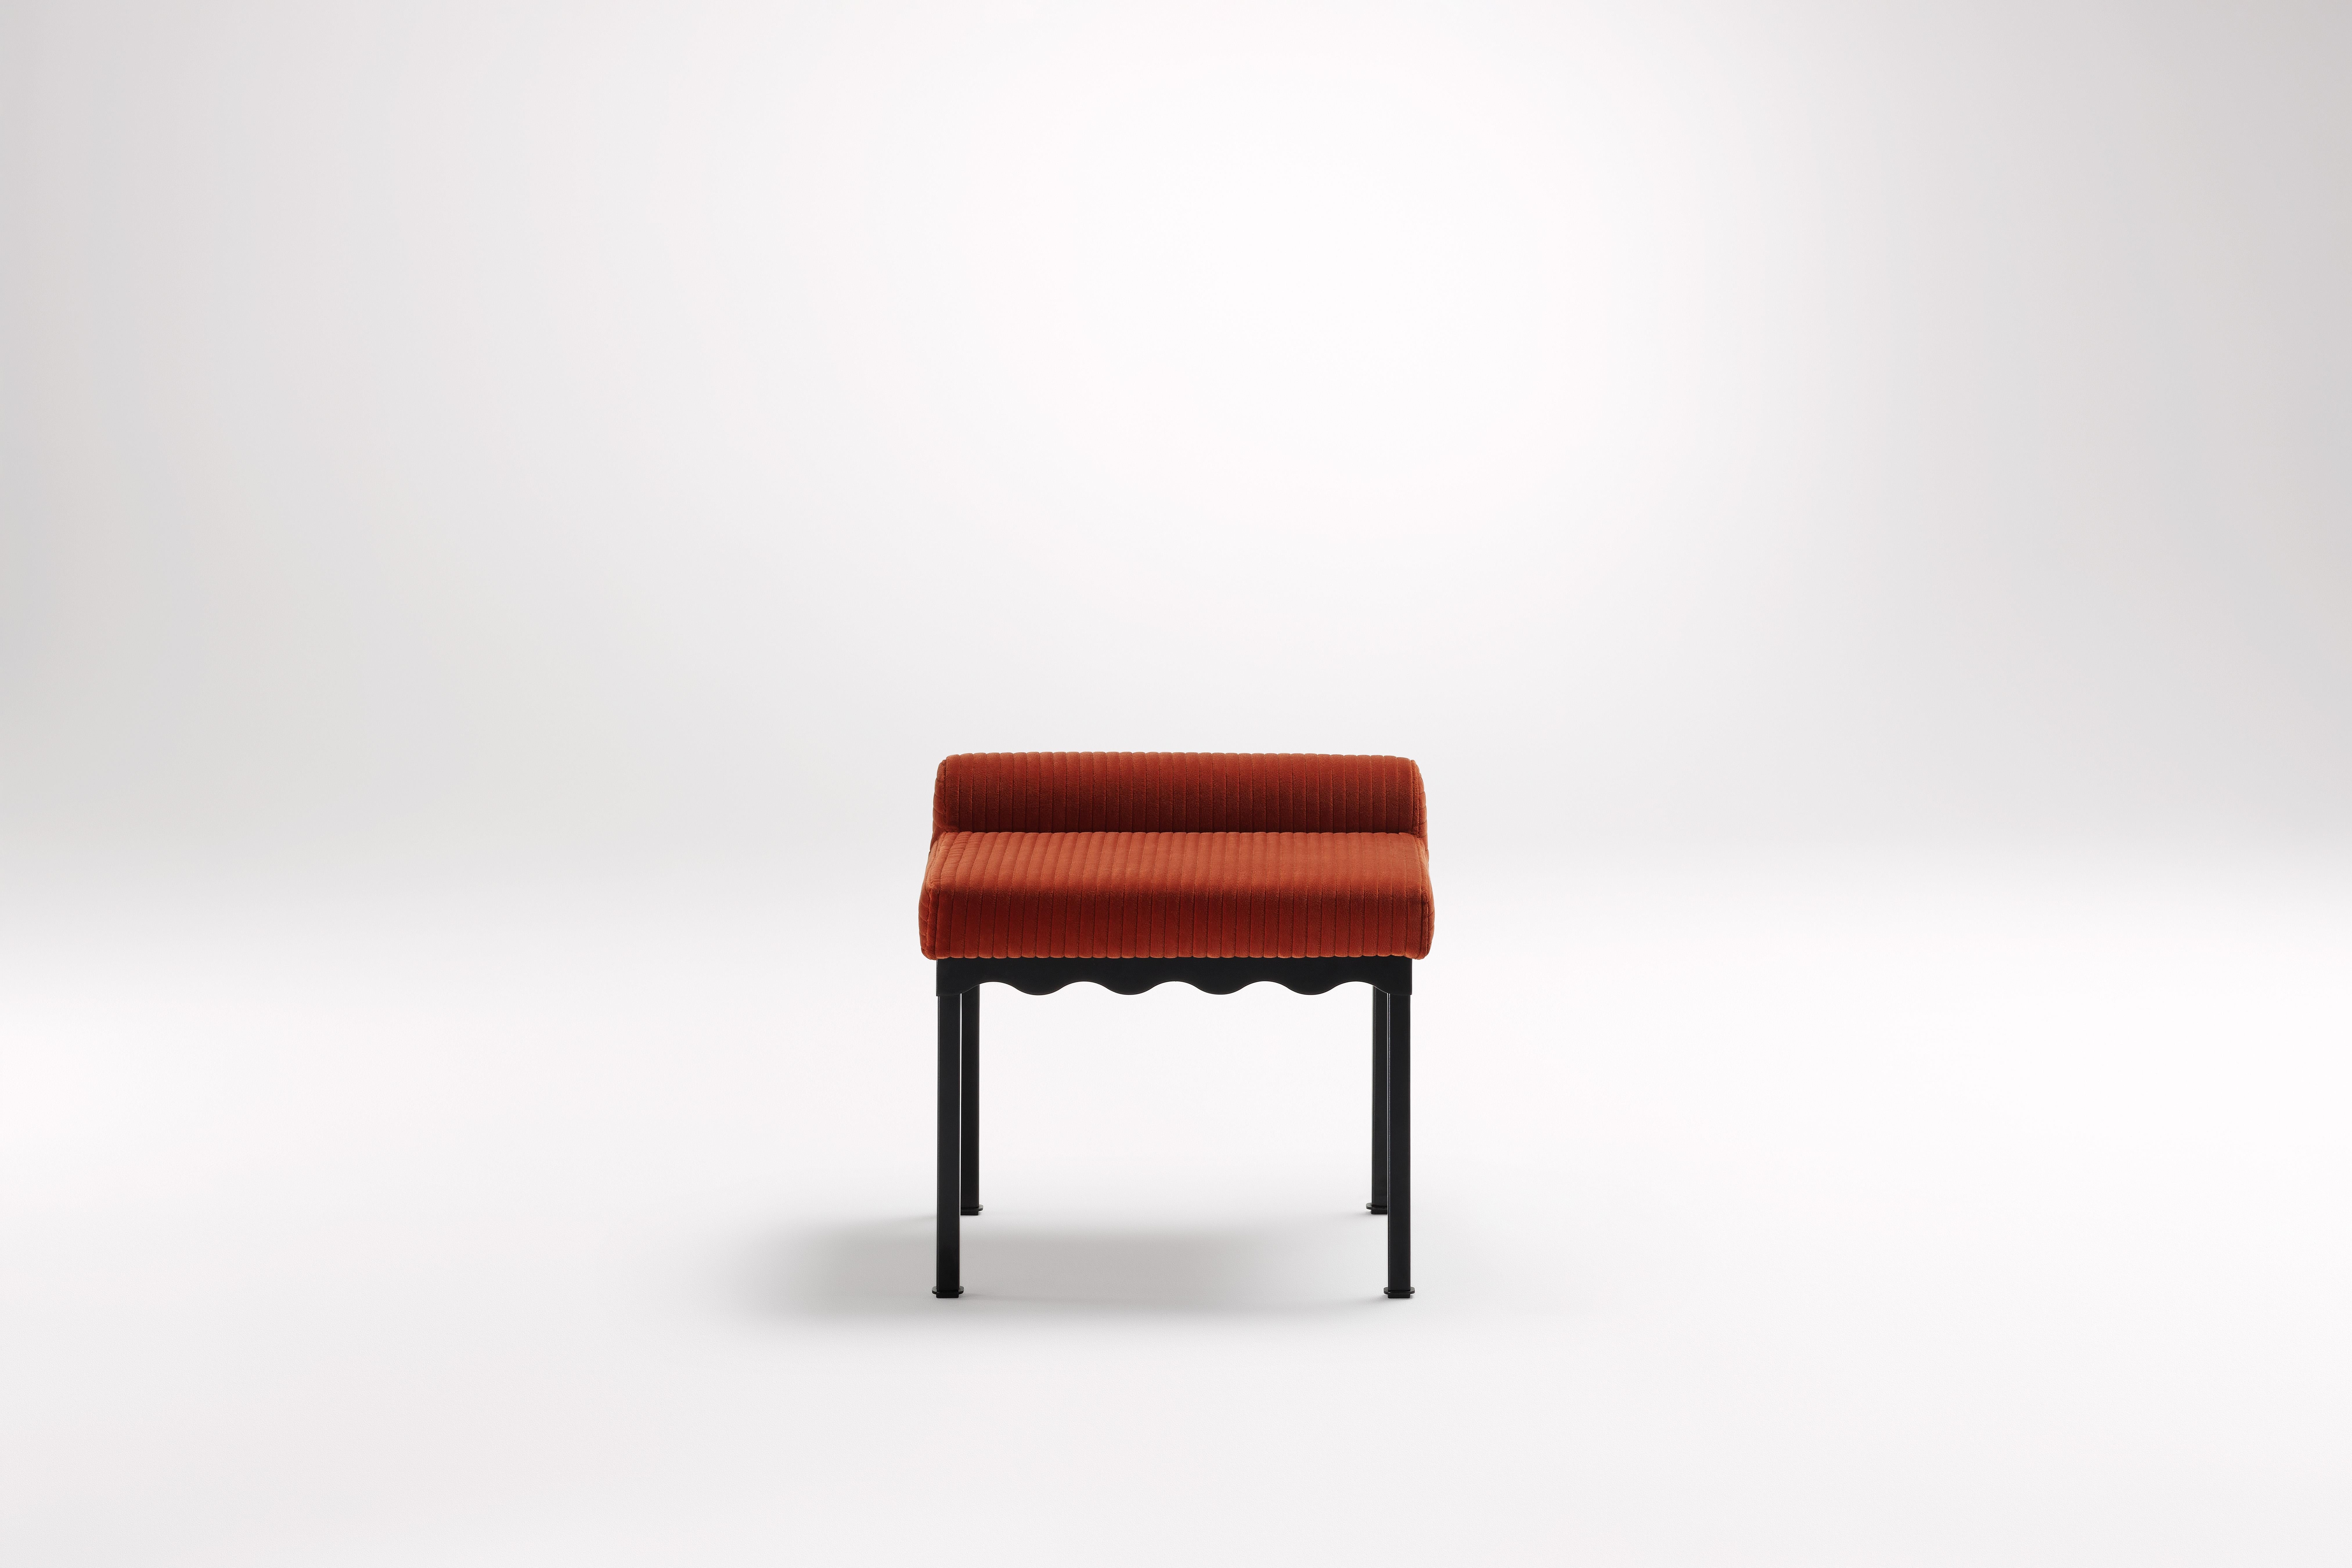 Sanguine Bellini 540 Bench by Coco Flip
Dimensions: D 54 x W 54 x H 52.5 cm
Materials: Timber / Upholstered tops, Powder-coated steel frame. 
Weight: 12 kg
Frame Finishes: Textura Black.

Coco Flip is a Melbourne based furniture and lighting design